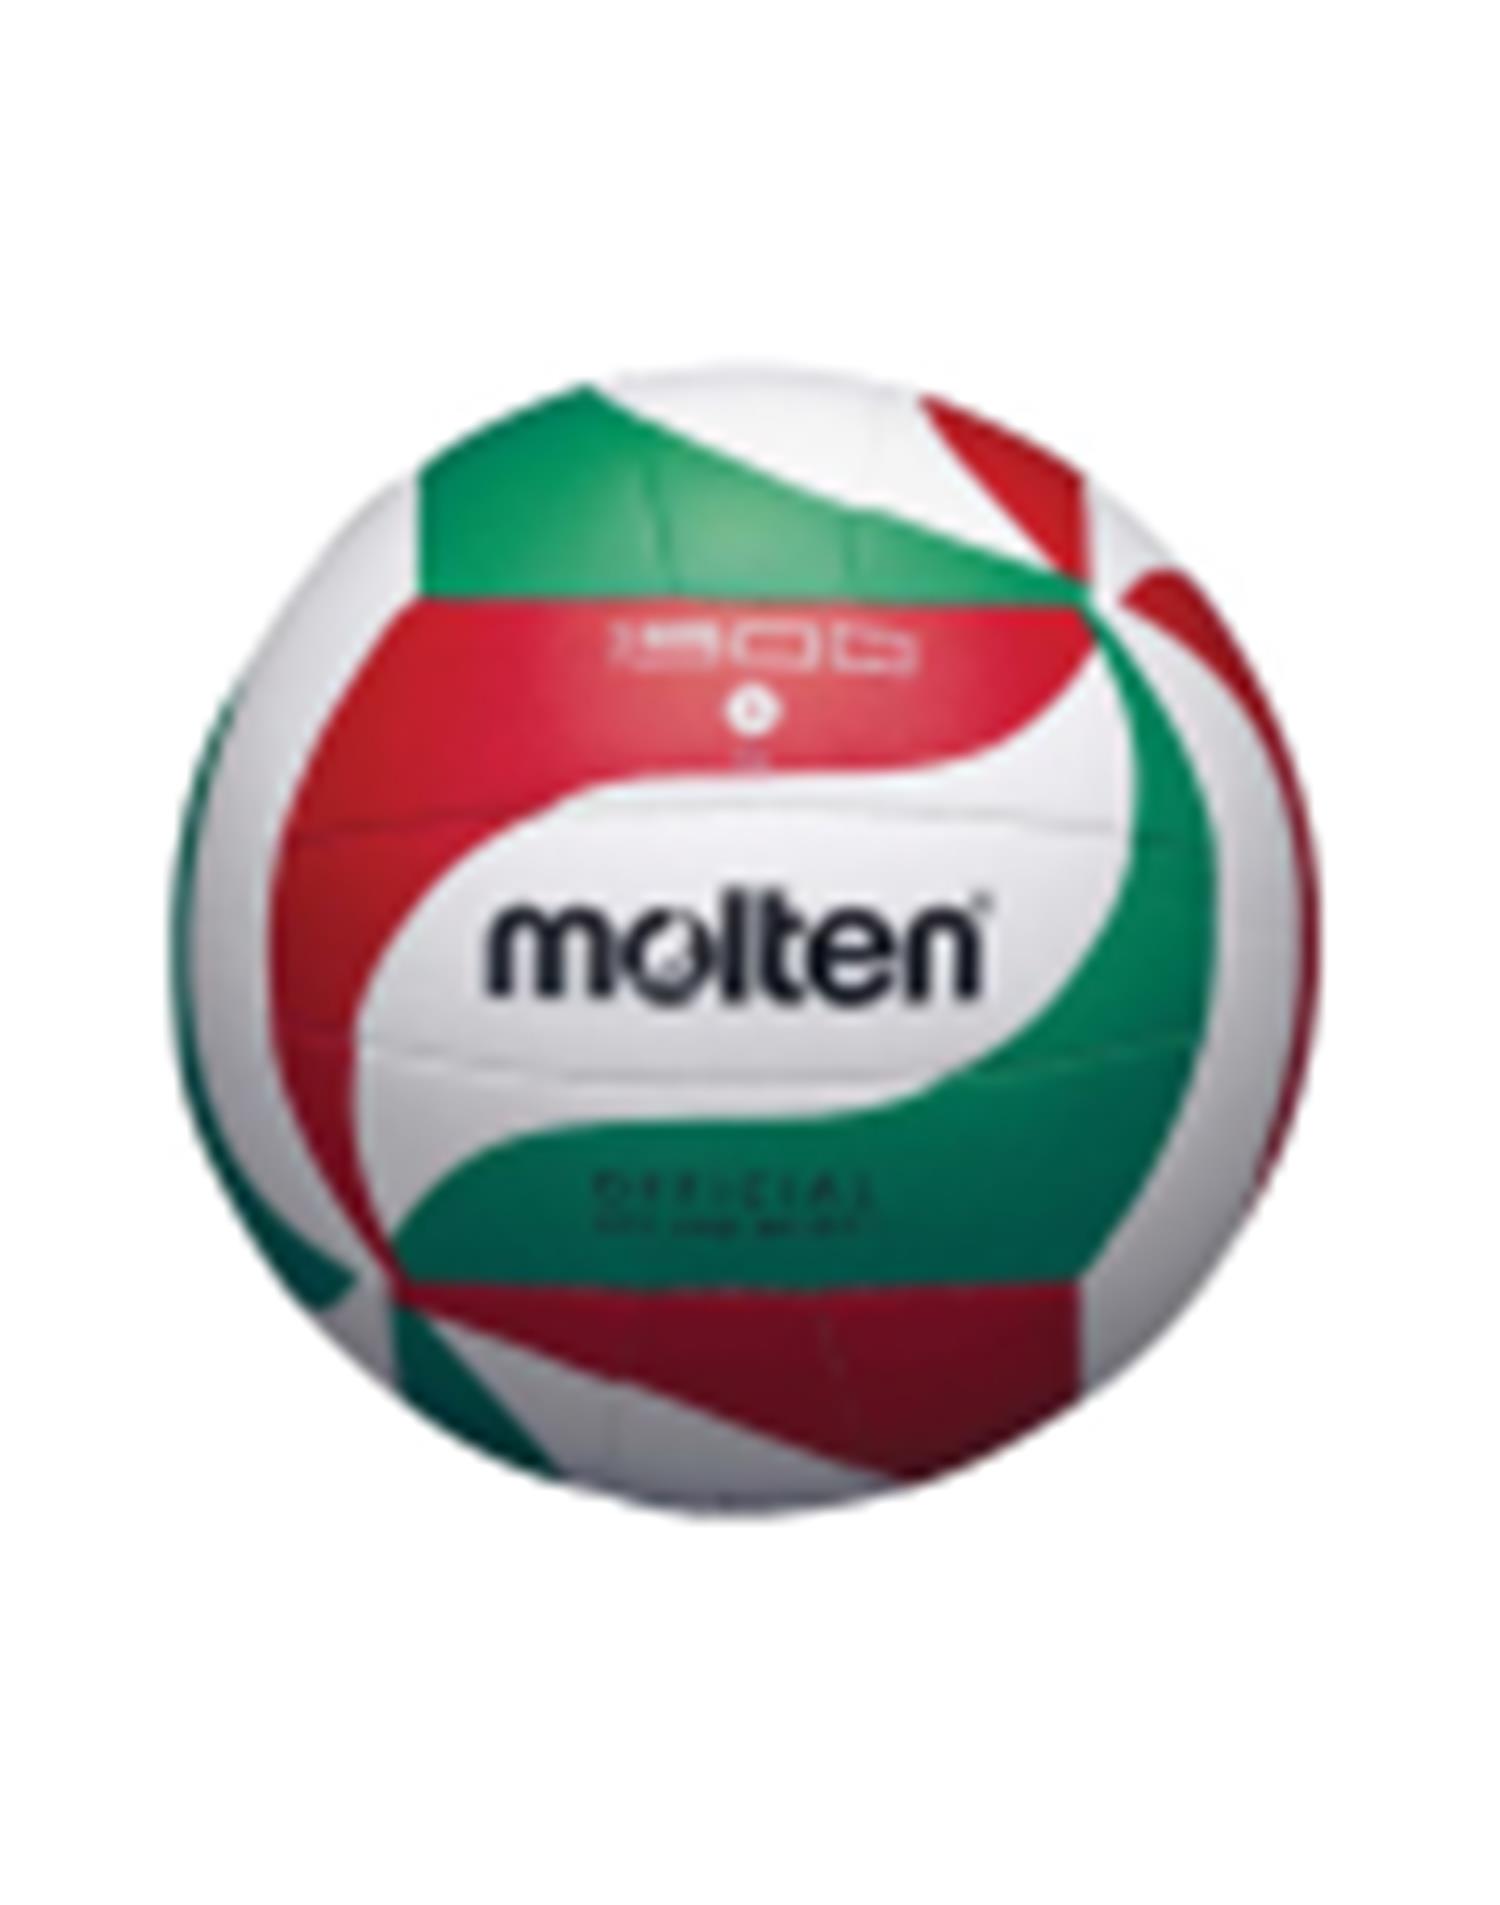 MOLTEN Pallone volley v5m1500 ultra touch